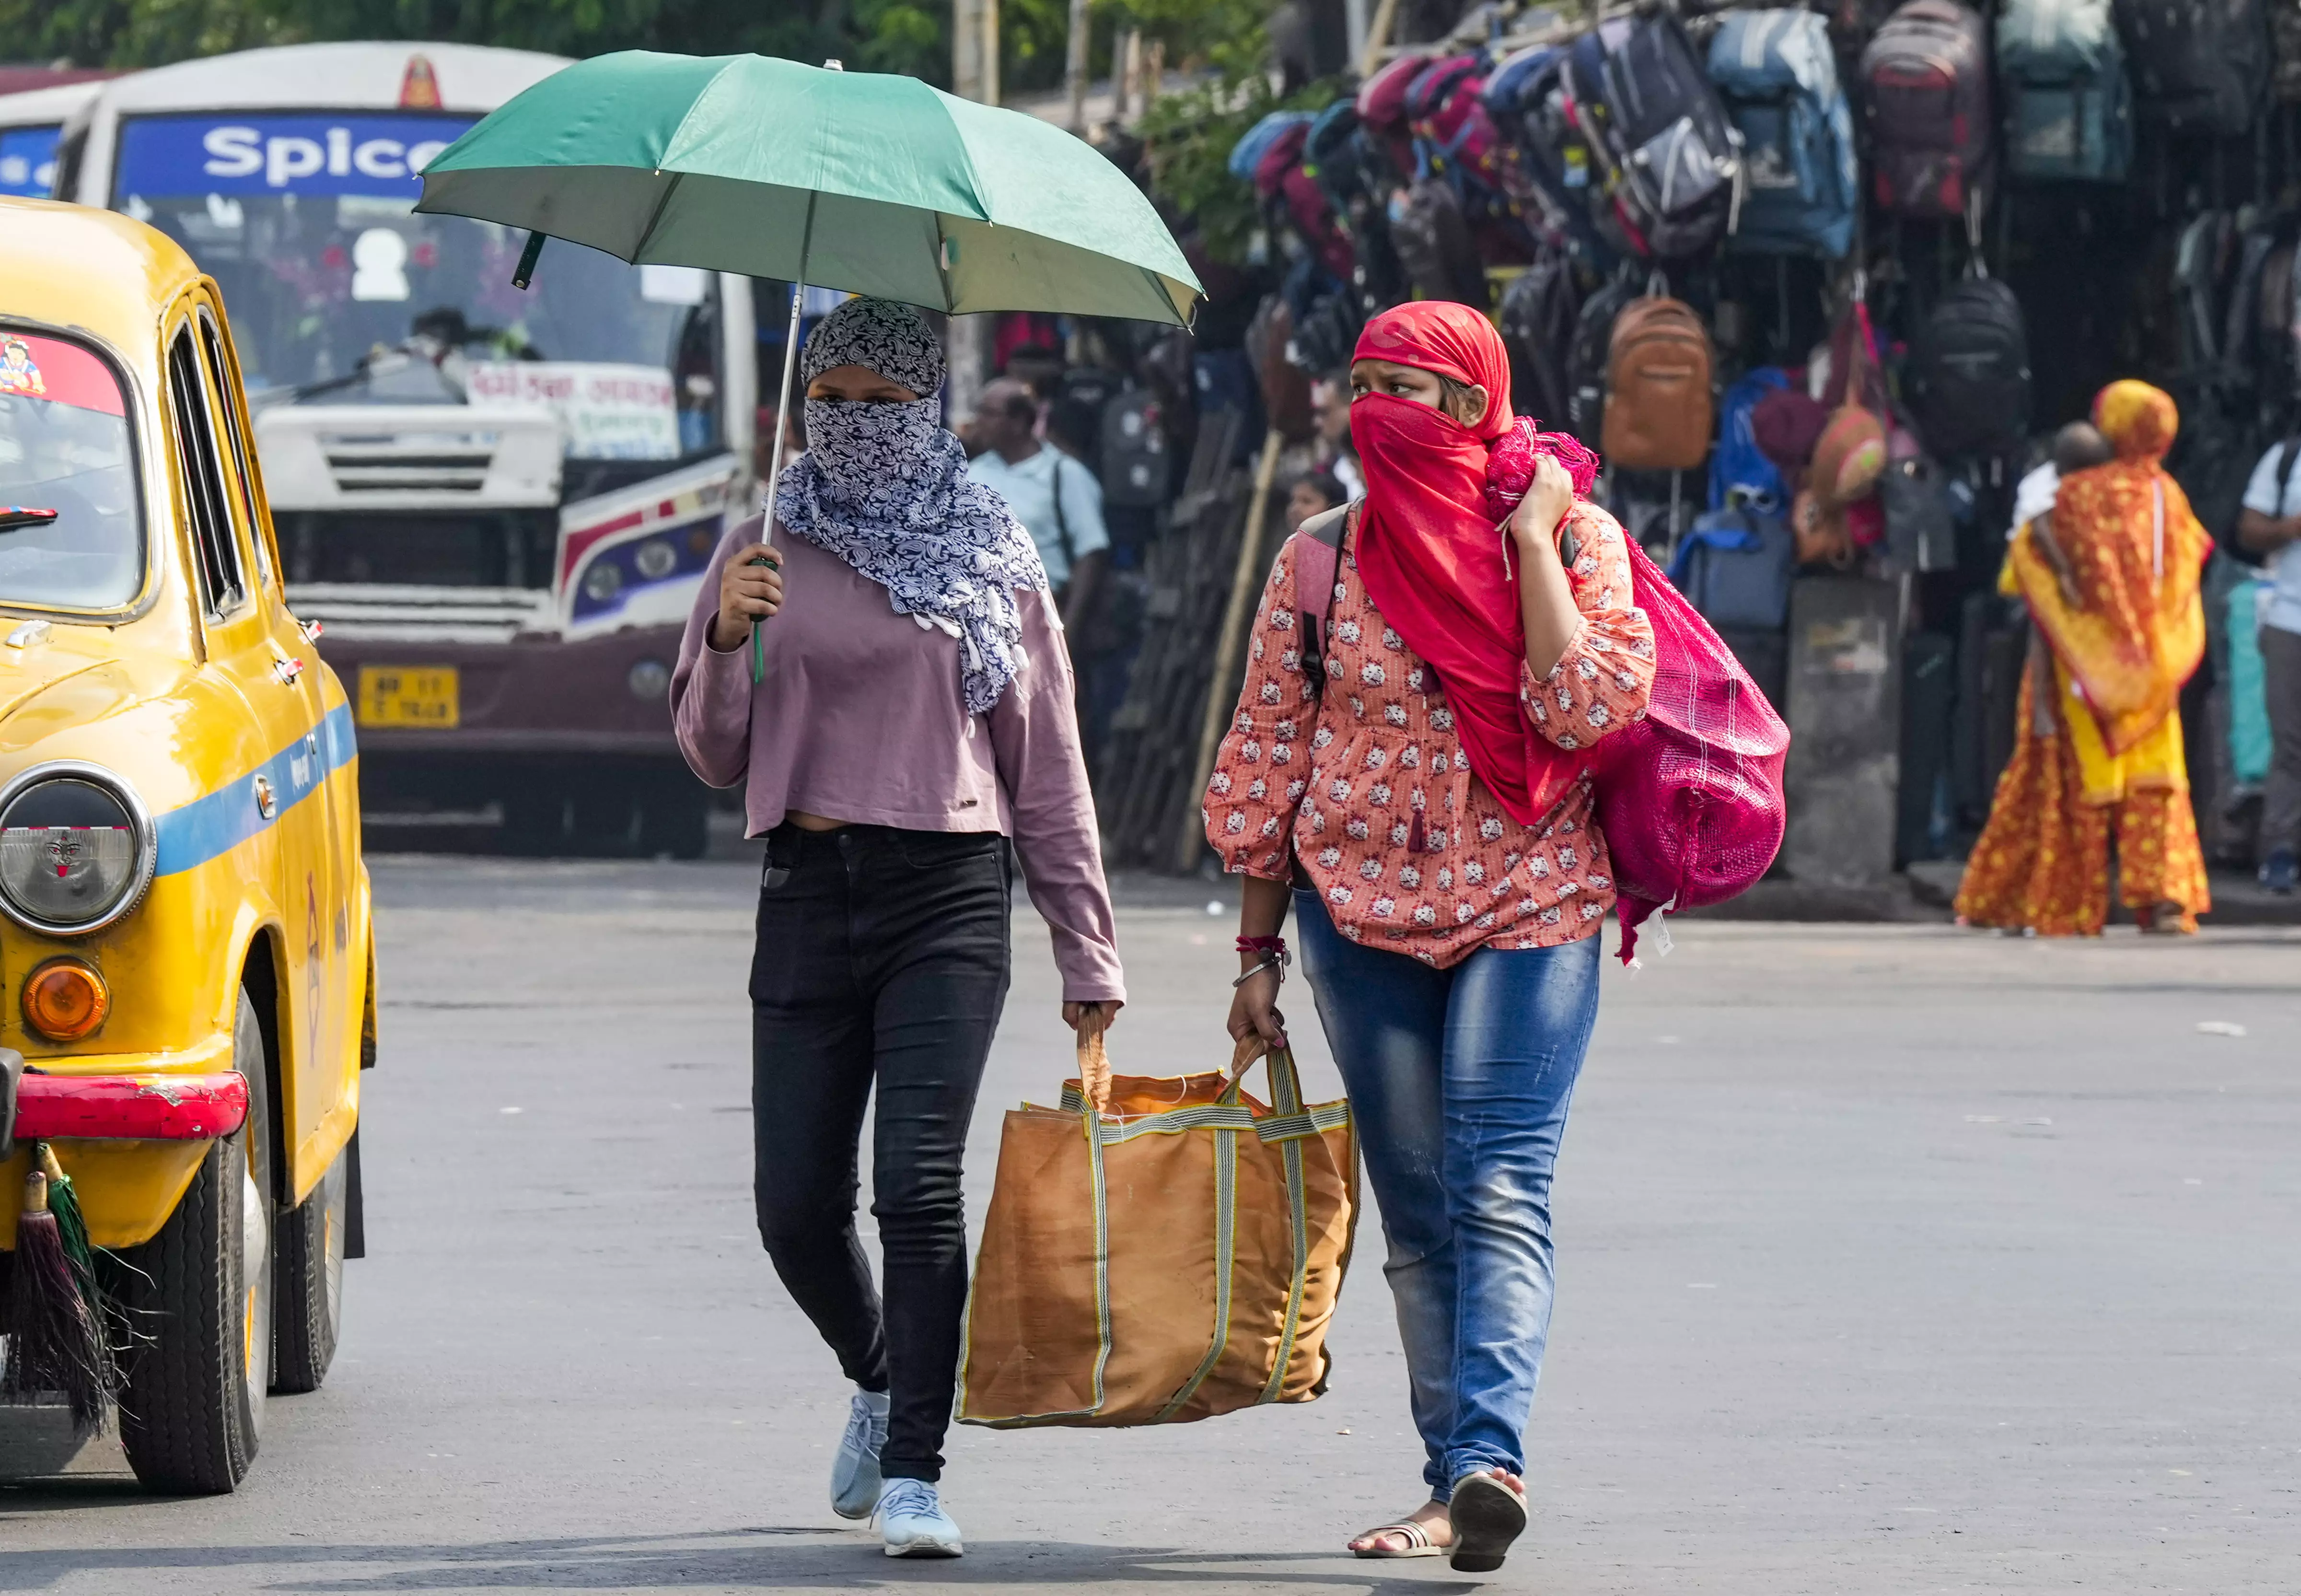 No relief in sight as severe heatwave grips East and South India